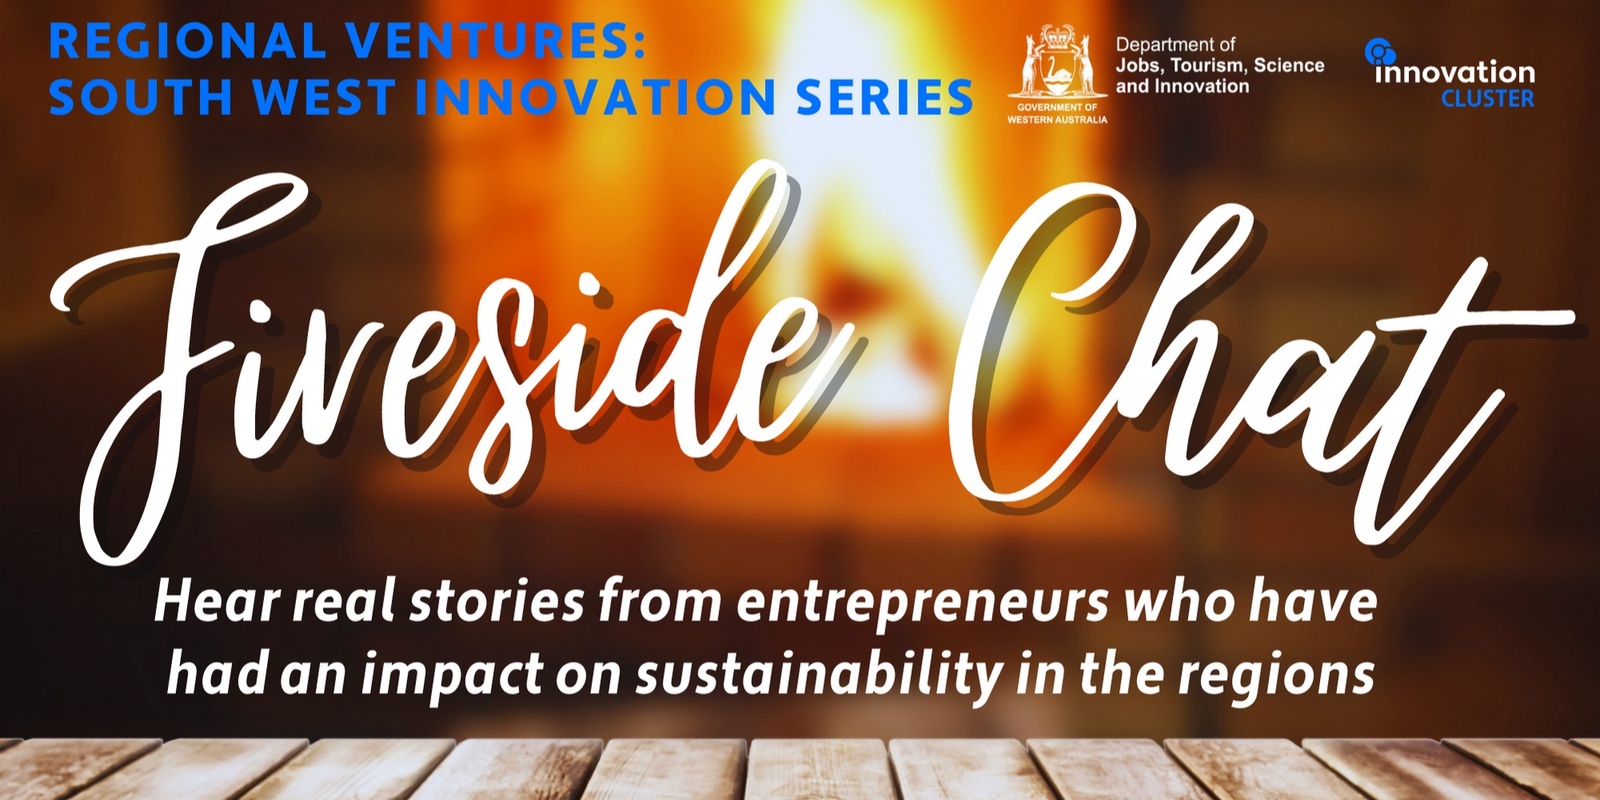 Banner image for REGIONAL VENTURES: SOUTH WEST INNOVATION SERIES: Fireside Chat